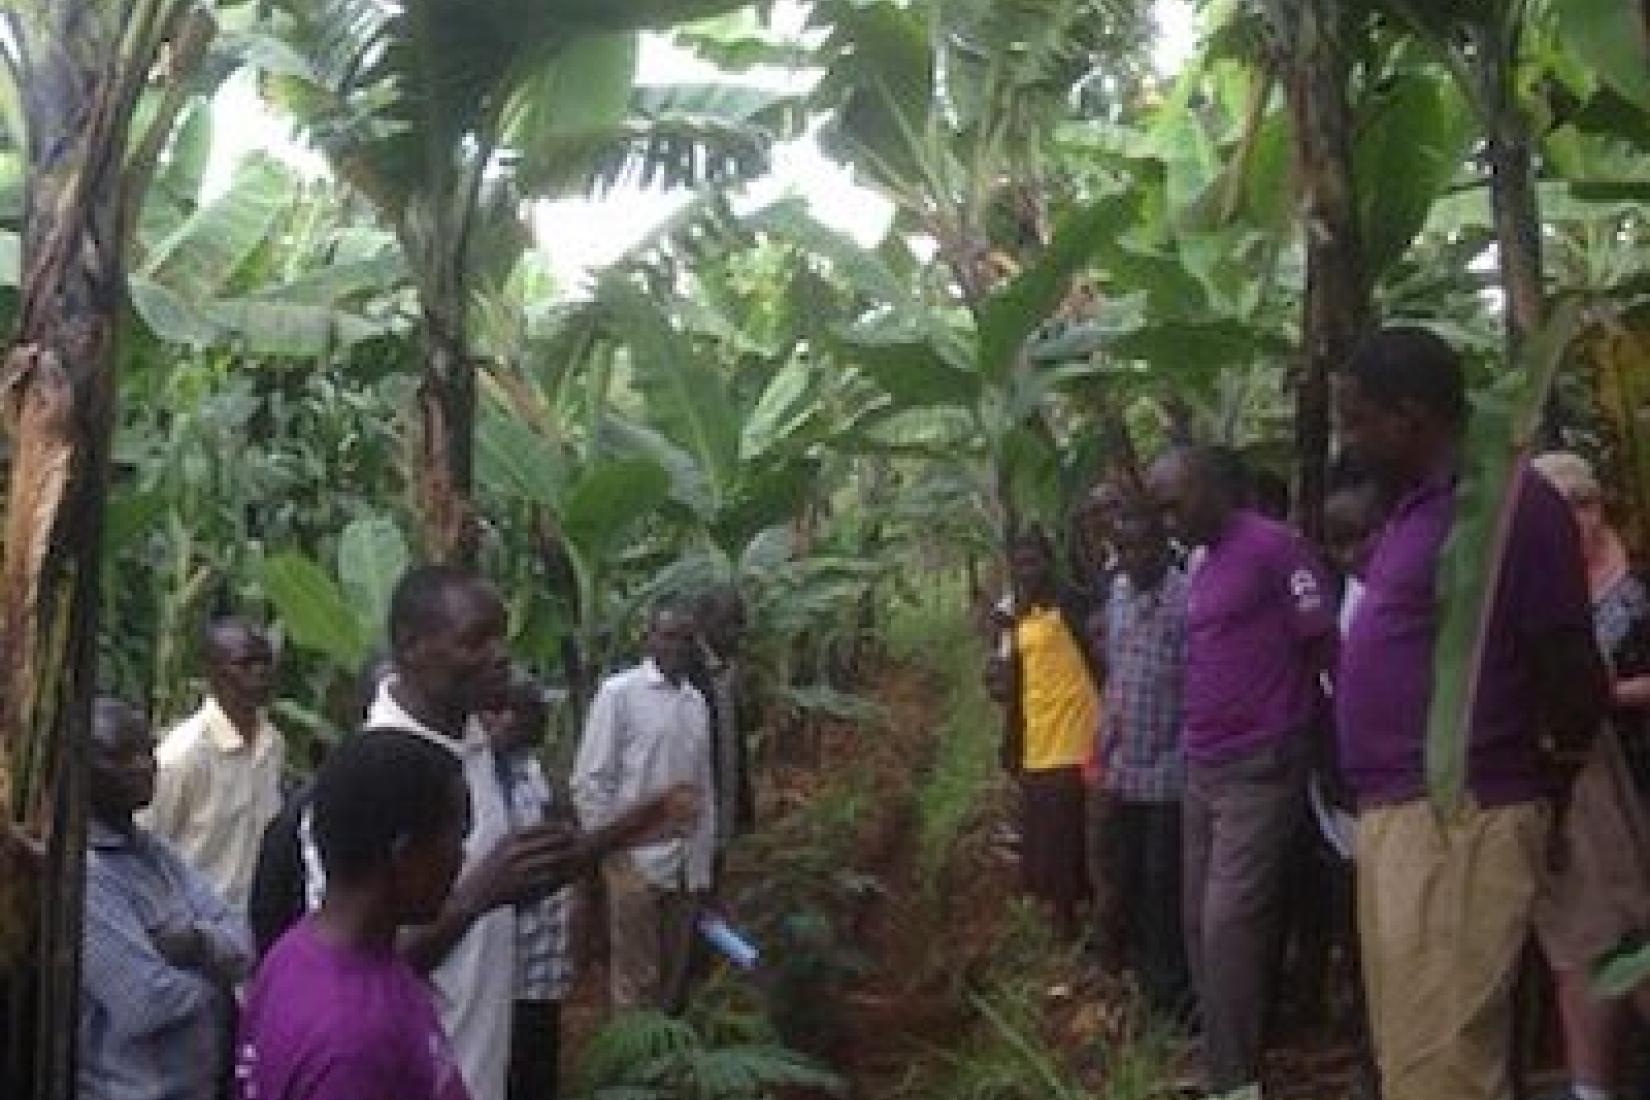 Inspecting soil conservation works and fodder shrubs within banana-coffee plantings. Image: Jason Alexandra